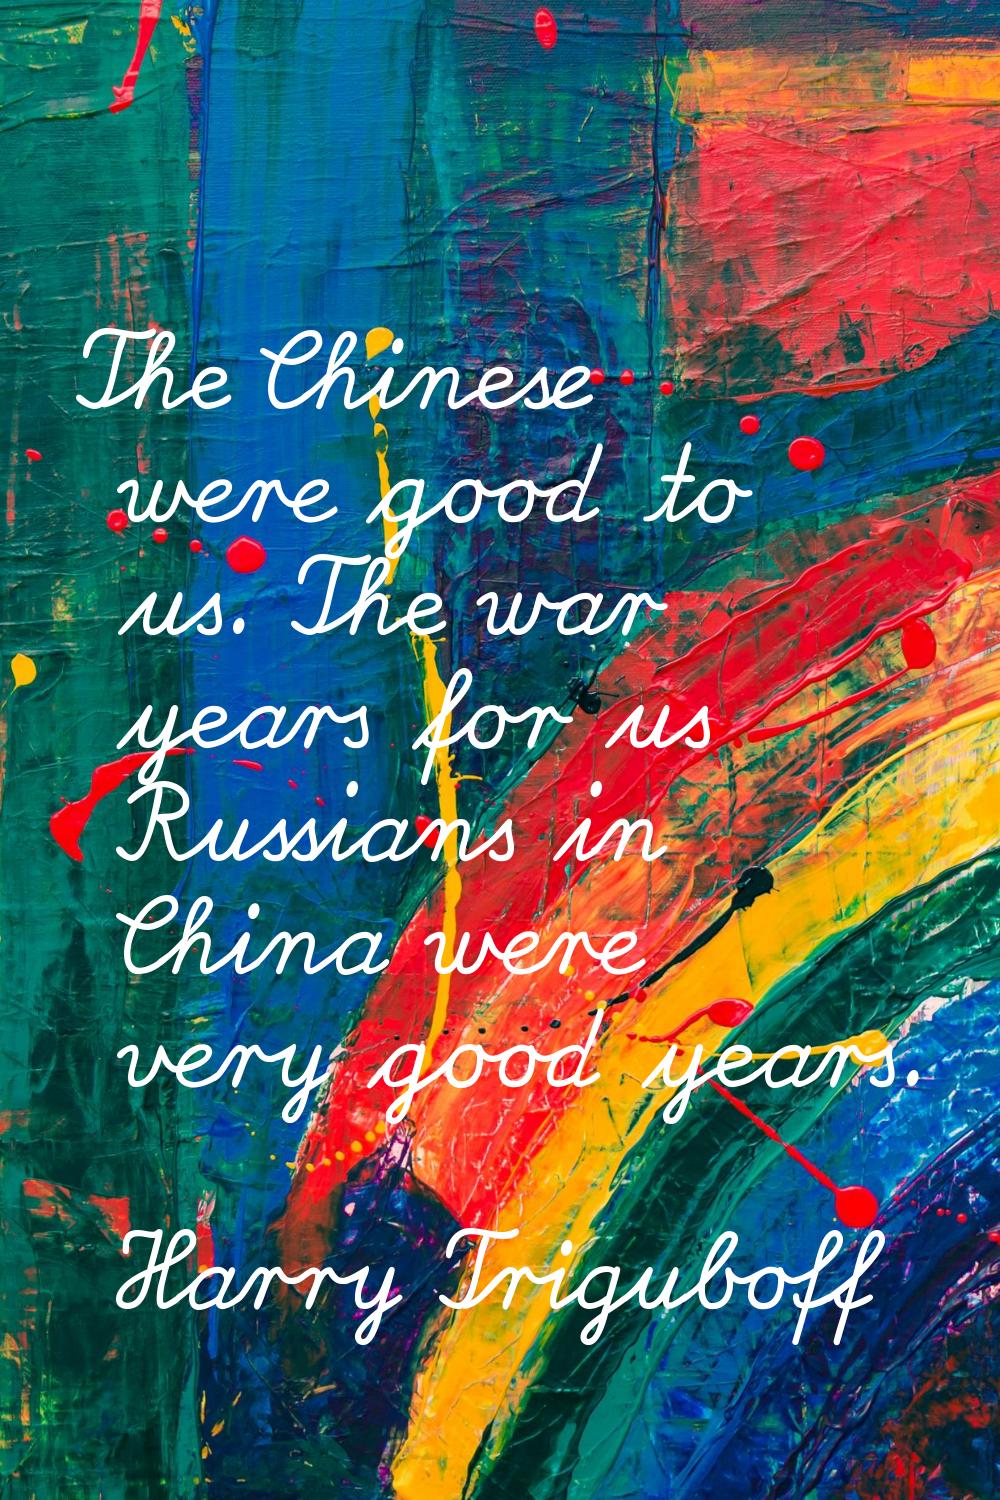 The Chinese were good to us. The war years for us Russians in China were very good years.